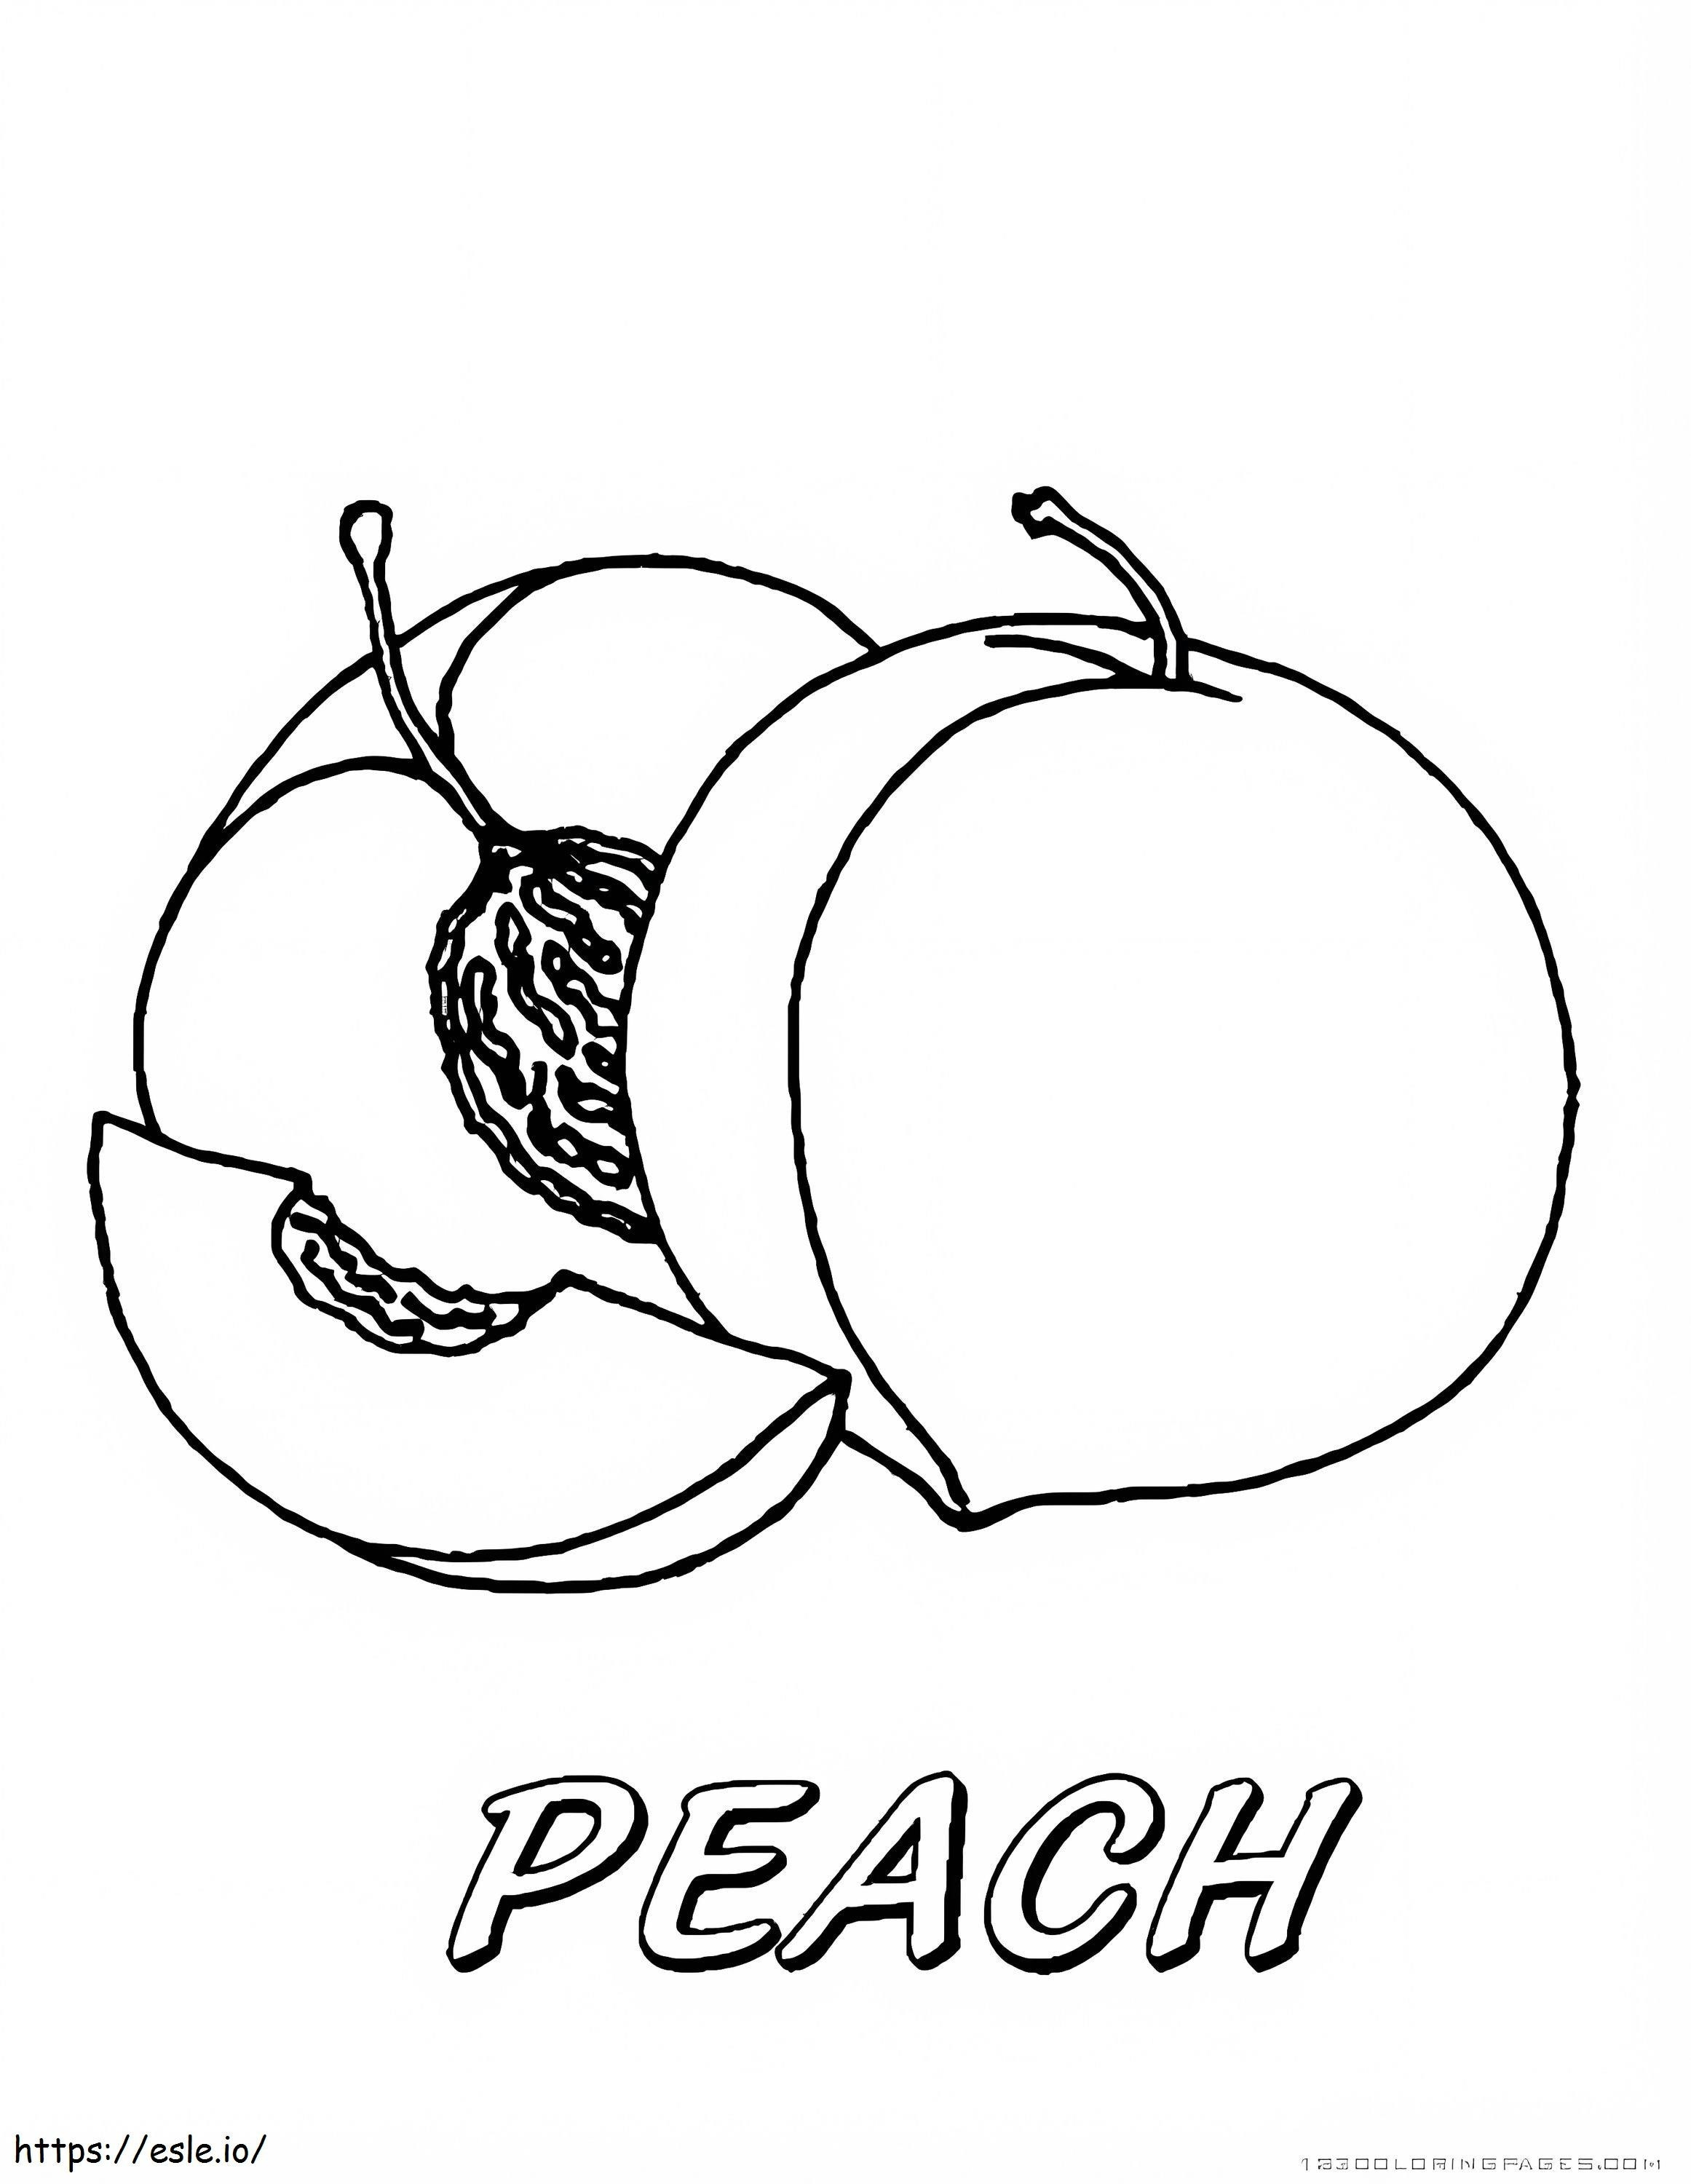 Peach Fruit coloring page